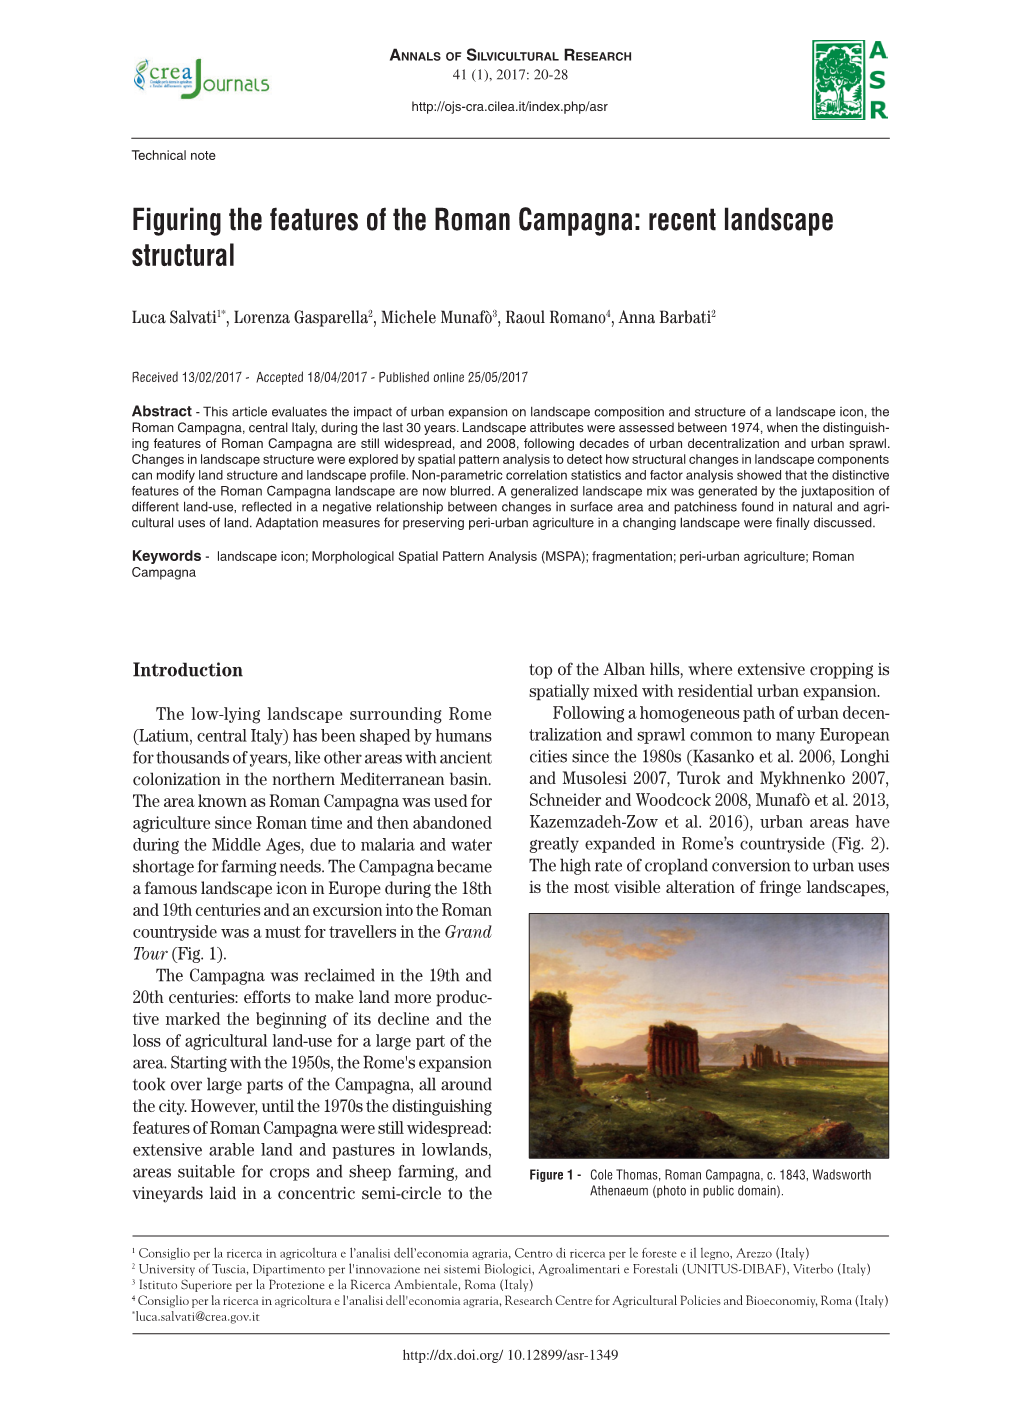 Figuring the Features of the Roman Campagna: Recent Landscape Structural